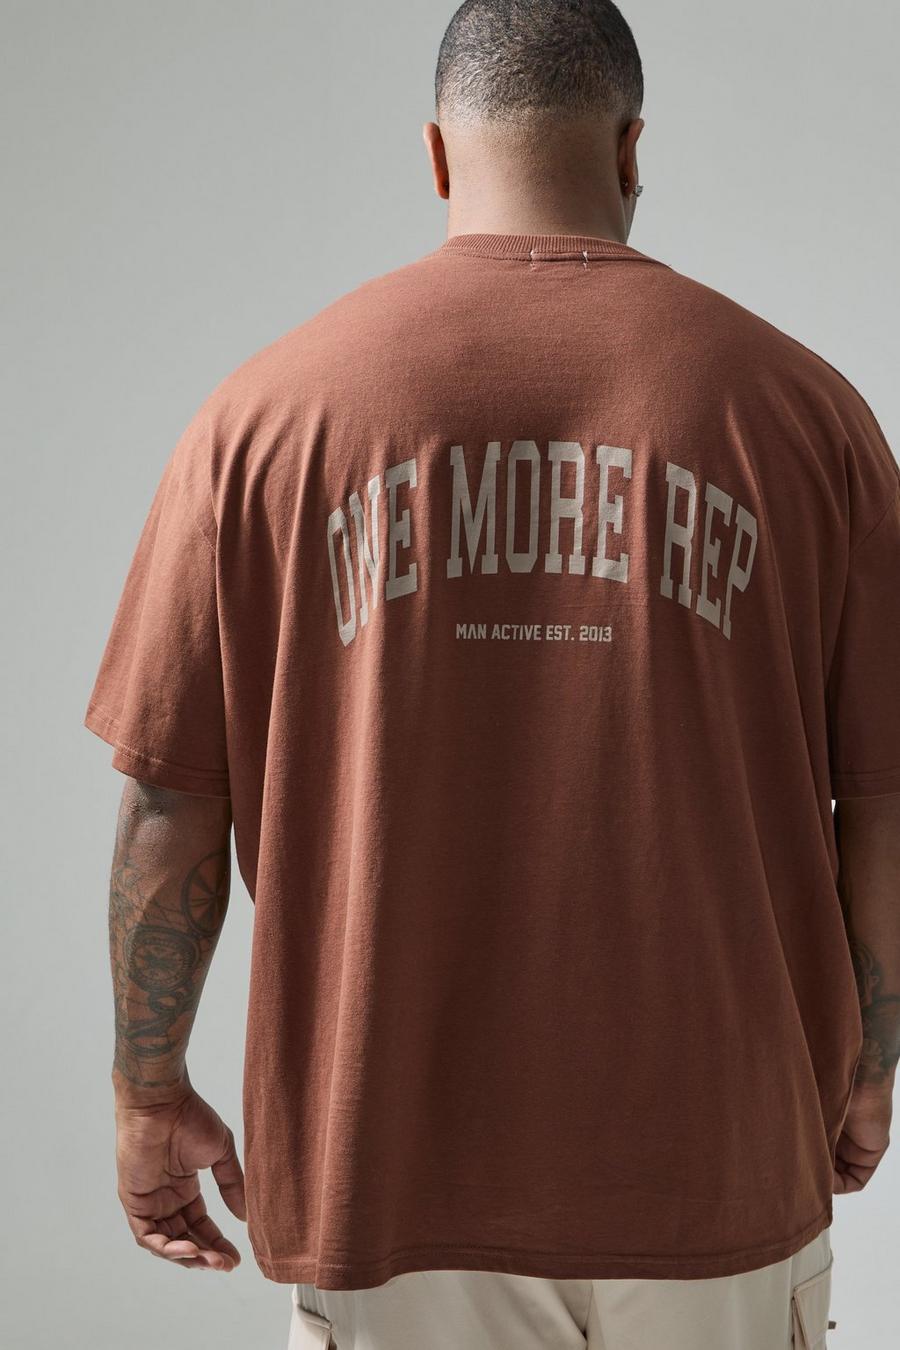 Chocolate Plus One More Rep Oversize t-shirt